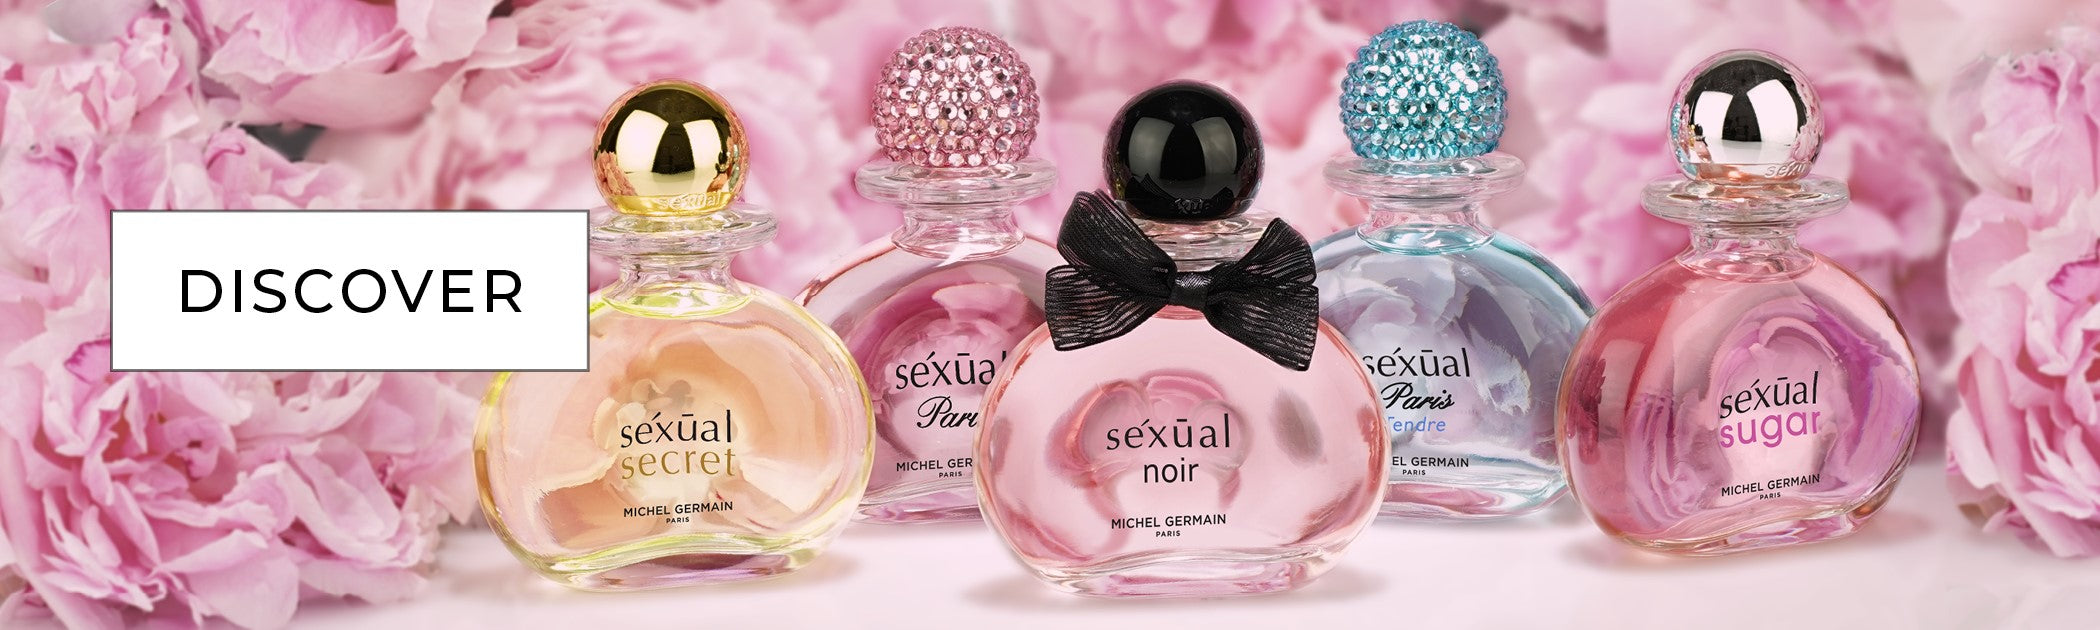 Discover Sexual Perfumes